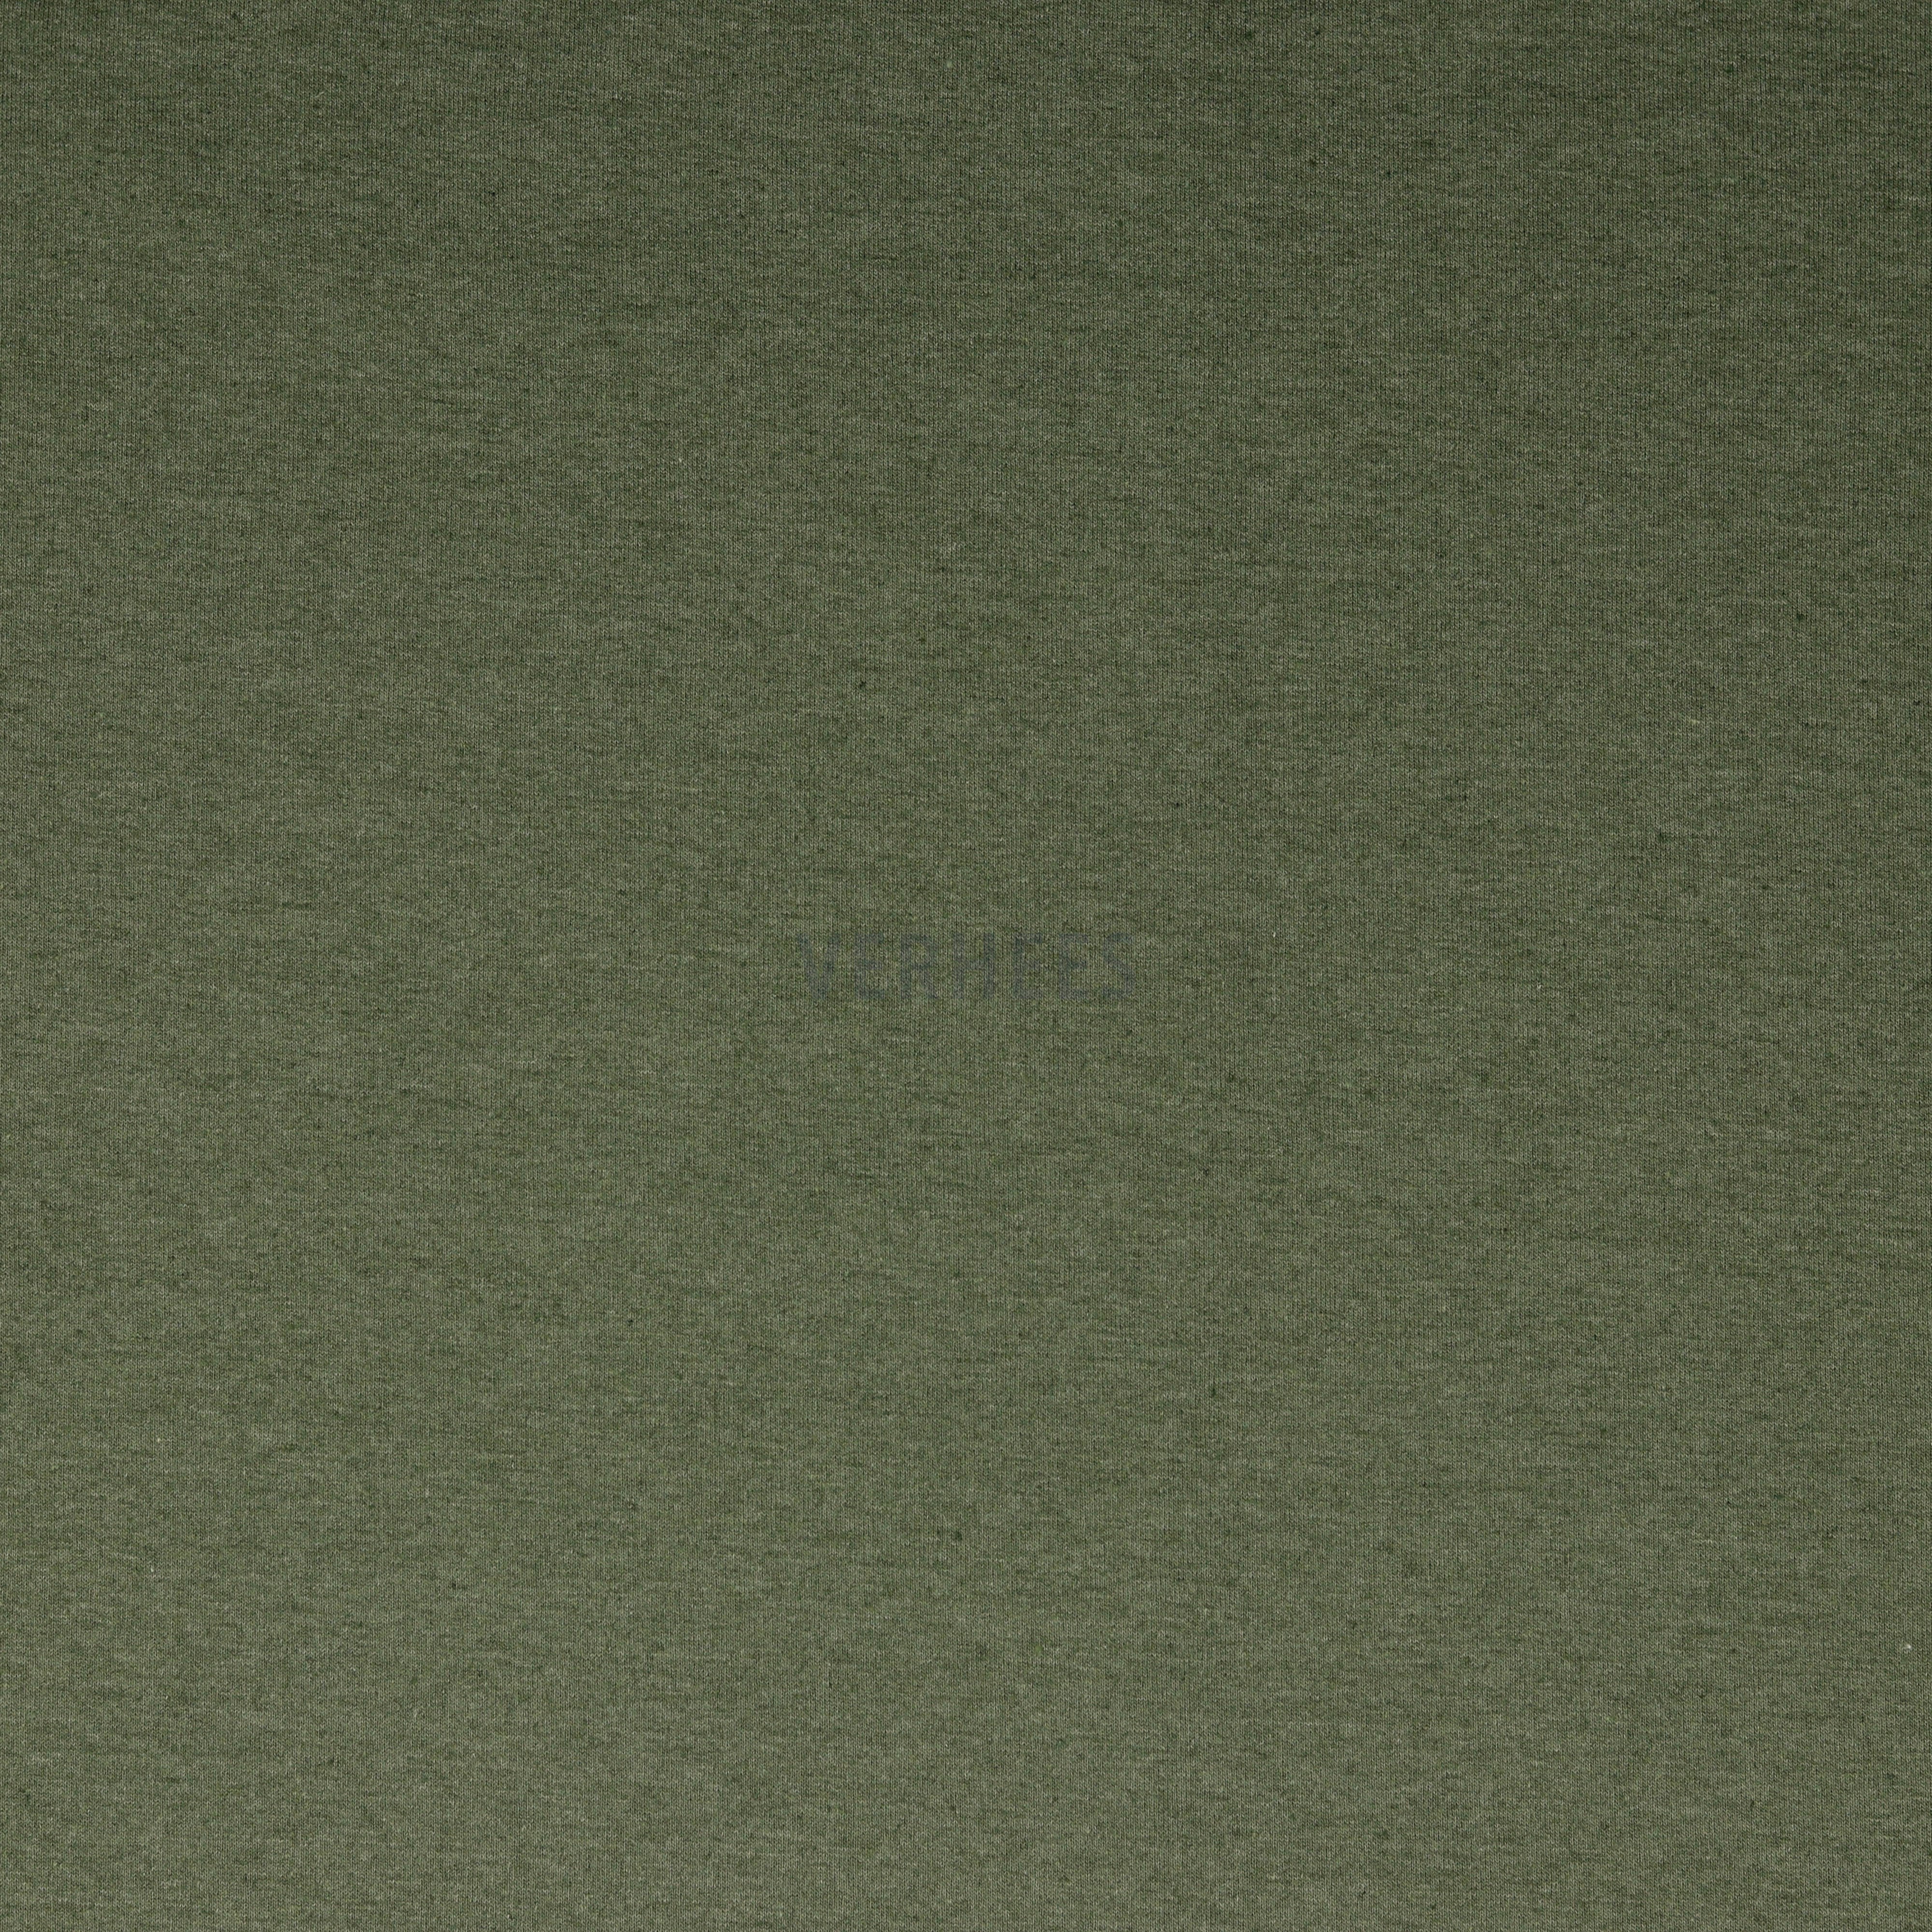 SWEAT RECYCLED MOSS GREEN (high resolution)